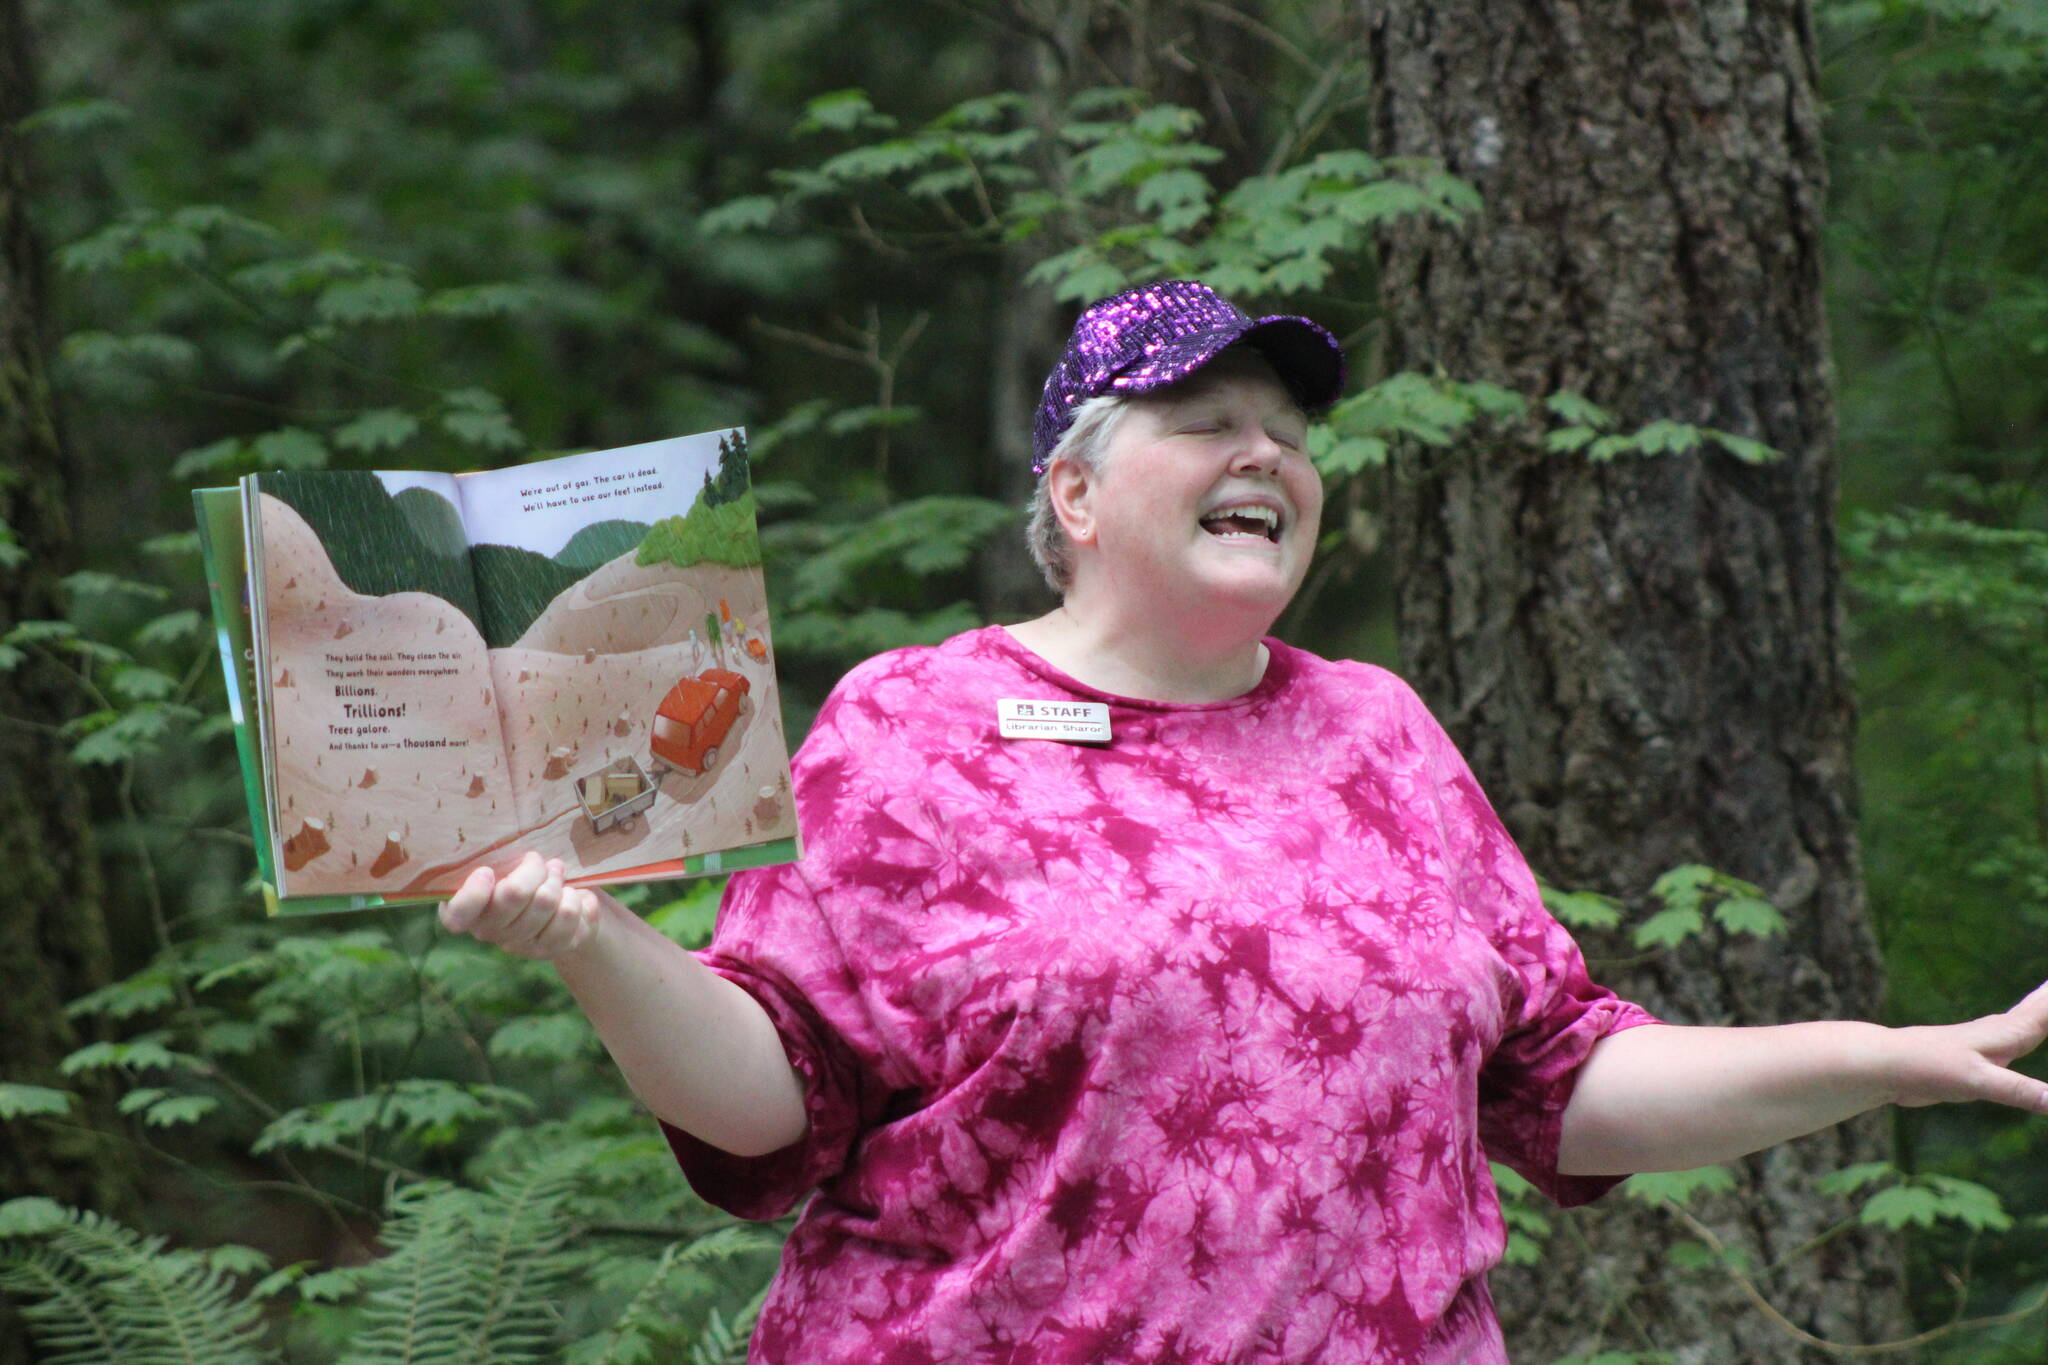 Chastain reads "Trillions Of Trees" to the crowd in the Lake Wilderness Arboretum. Photo by Bailey Jo Josie/Sound Publishing.